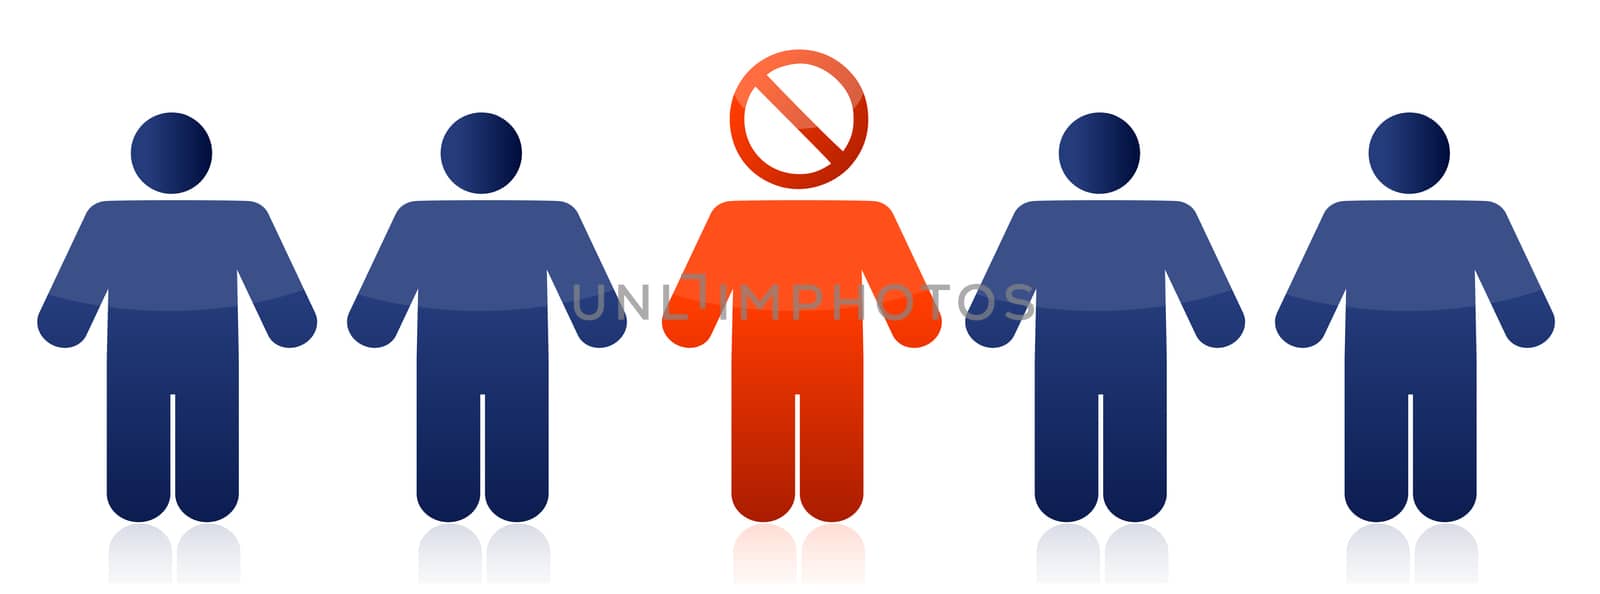 Row of people with do not sign illustration design